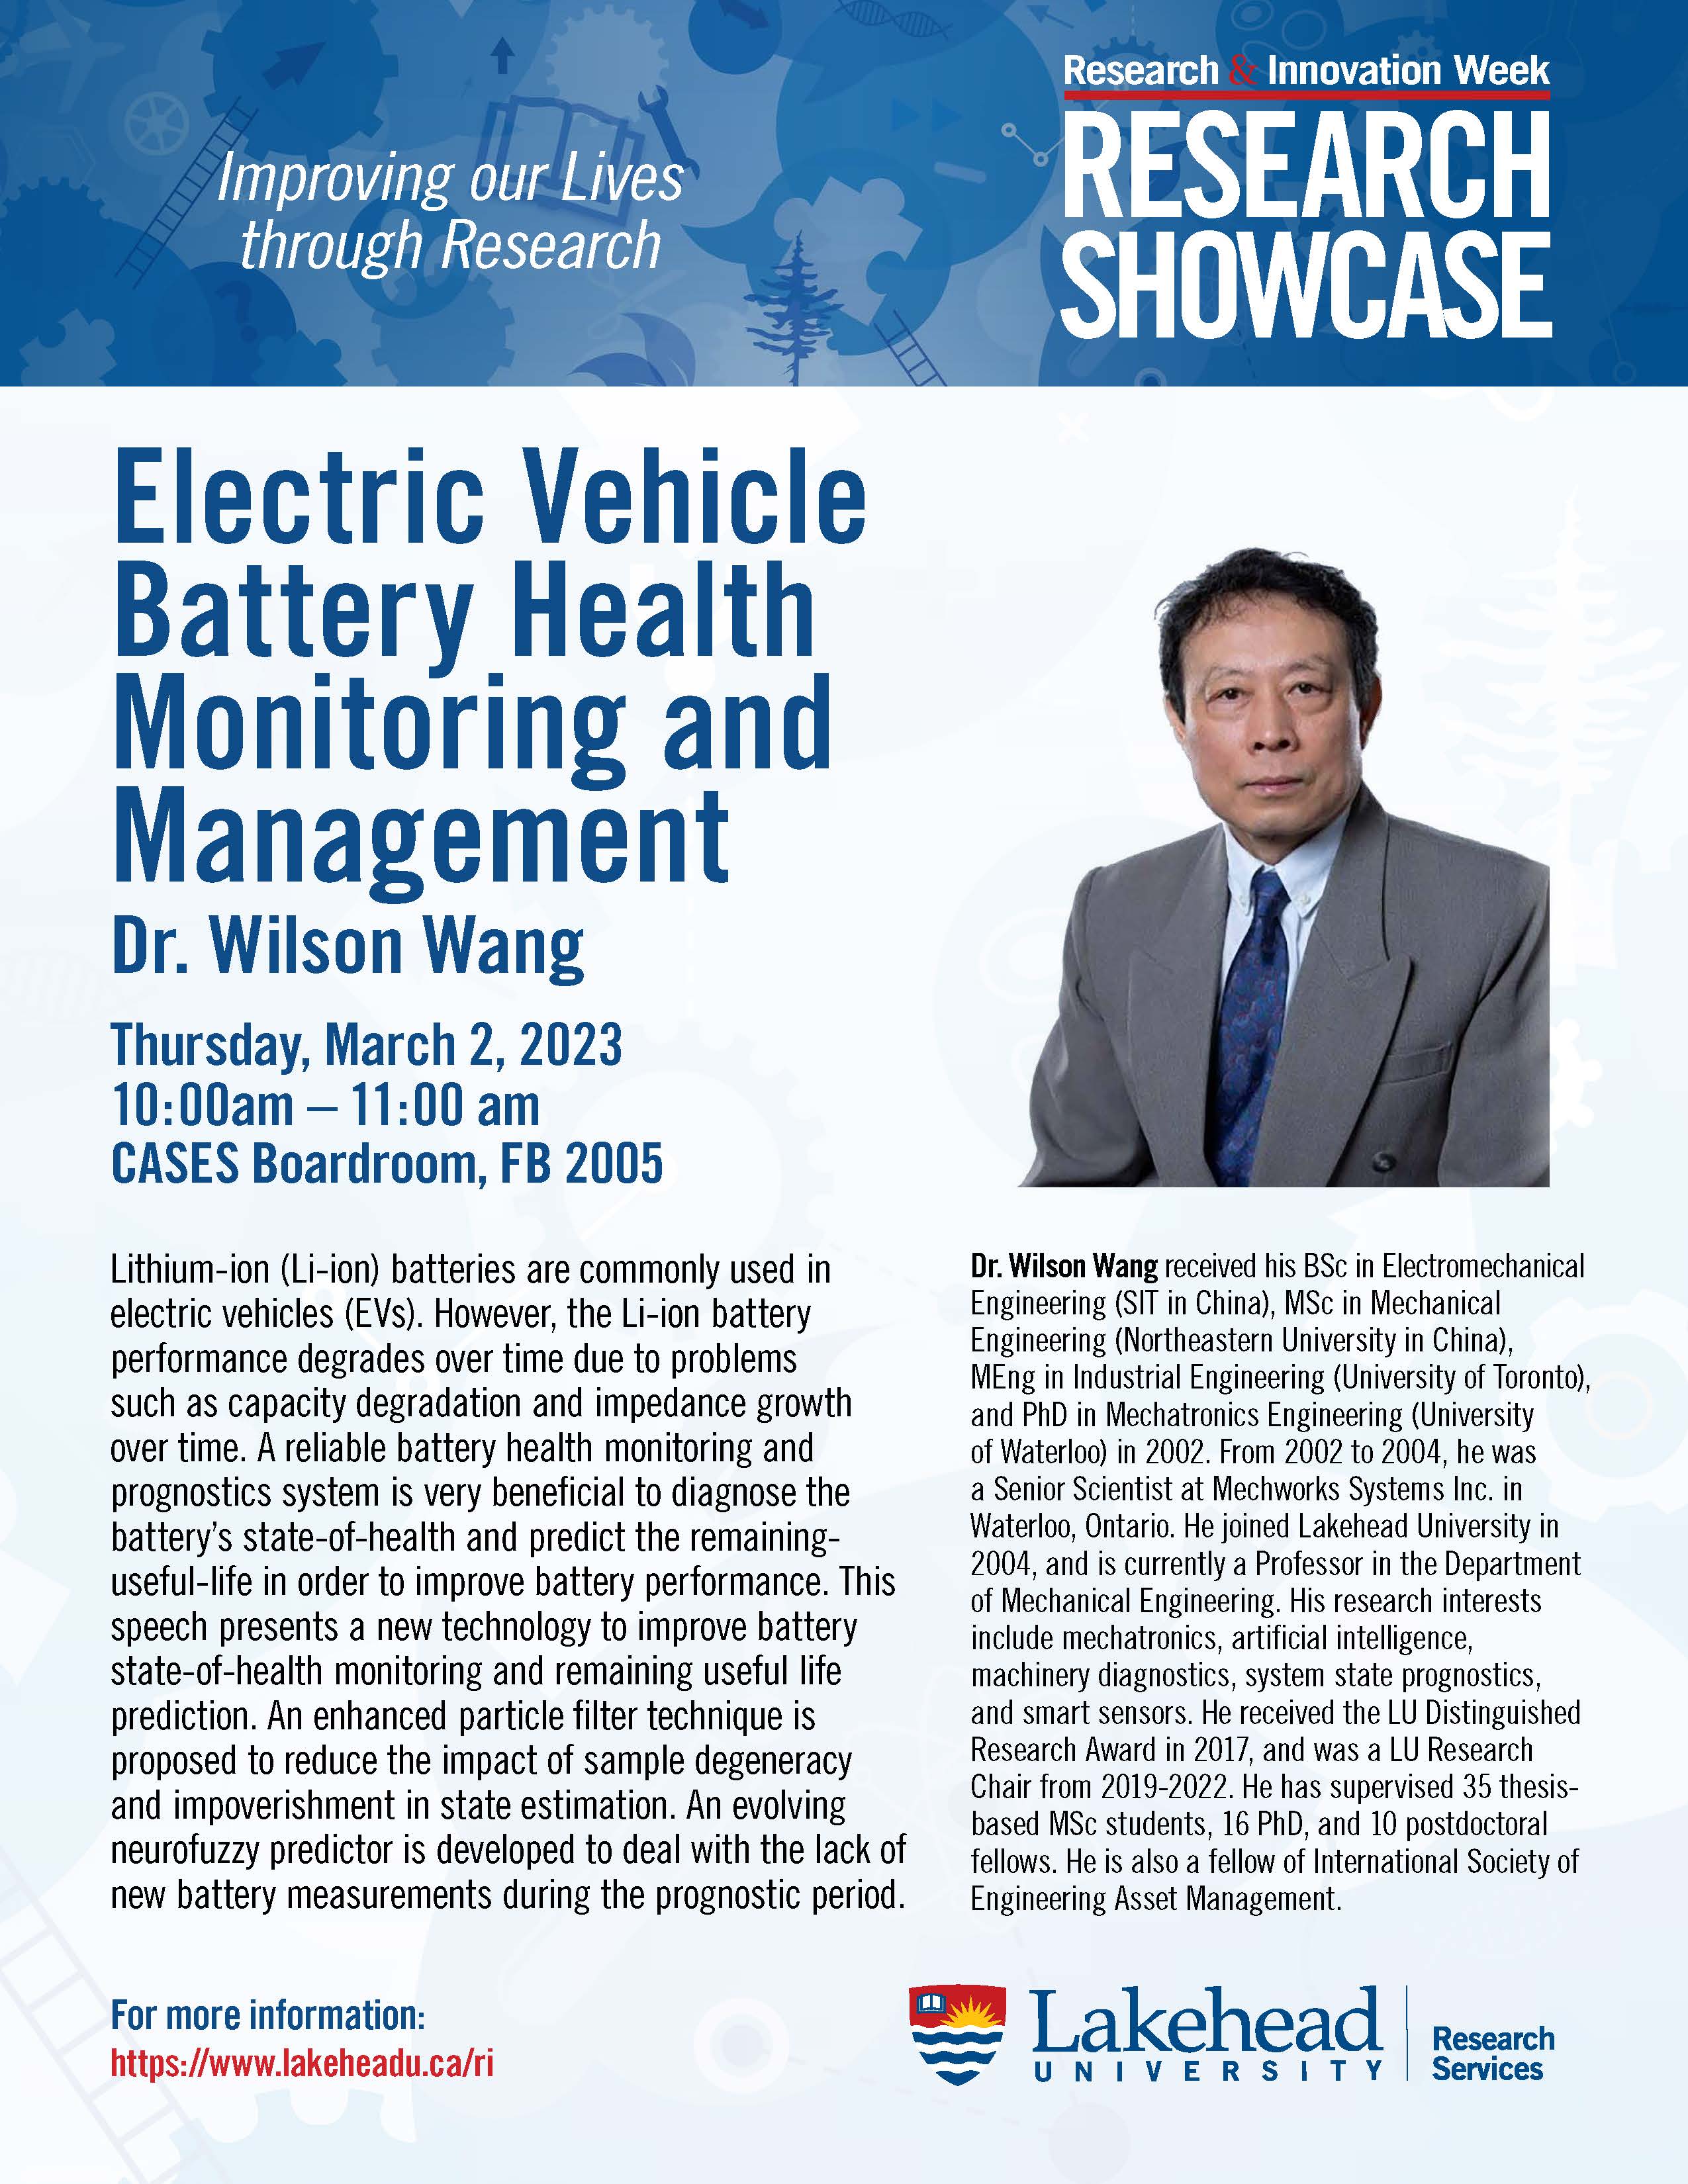 Poster for Electric Vehicle Battery Health Monitoring and Management